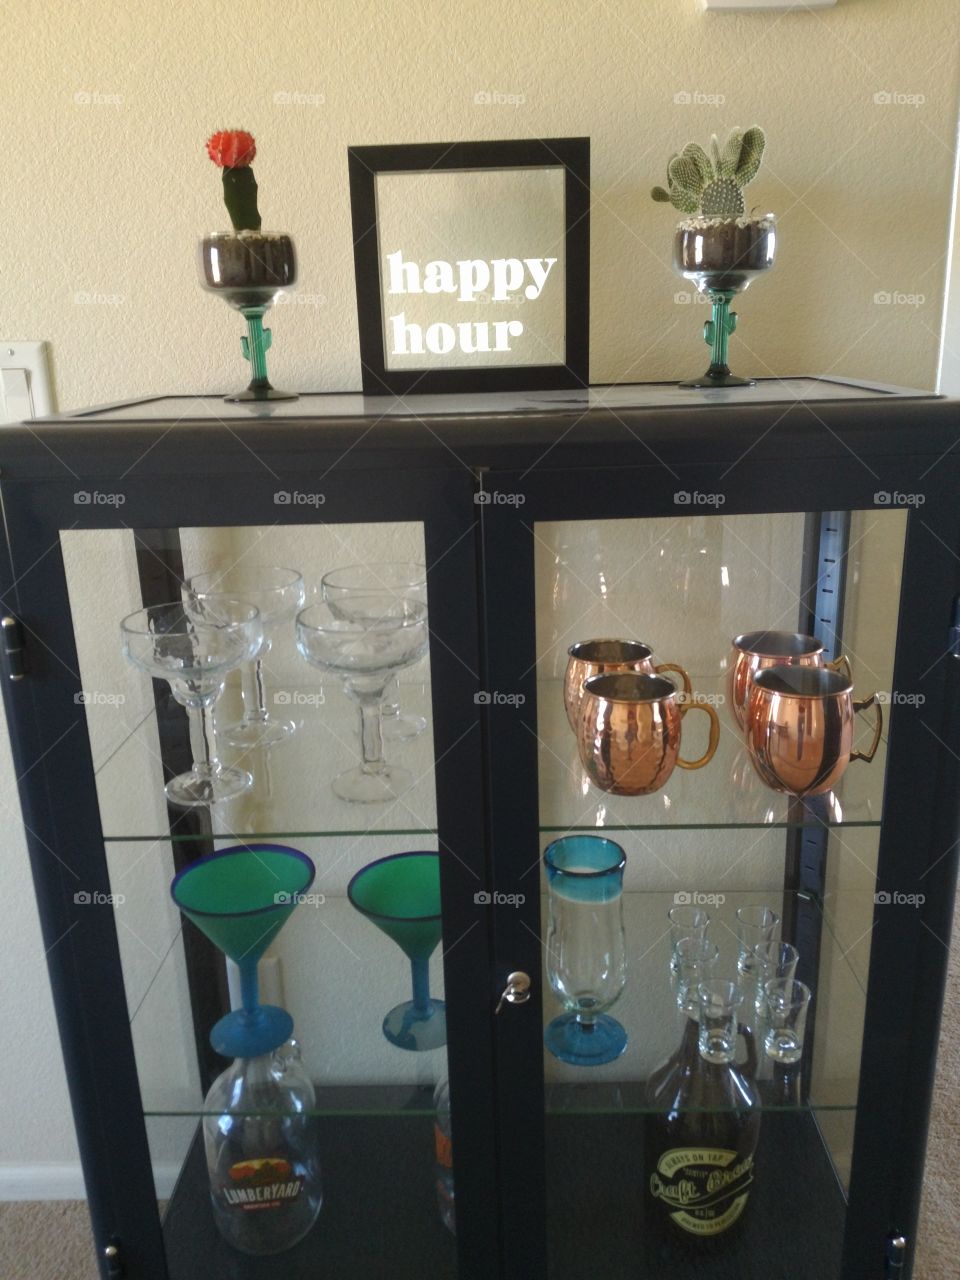 happy hour signed setting on bar with cactus in margarita cup and other bar glasses